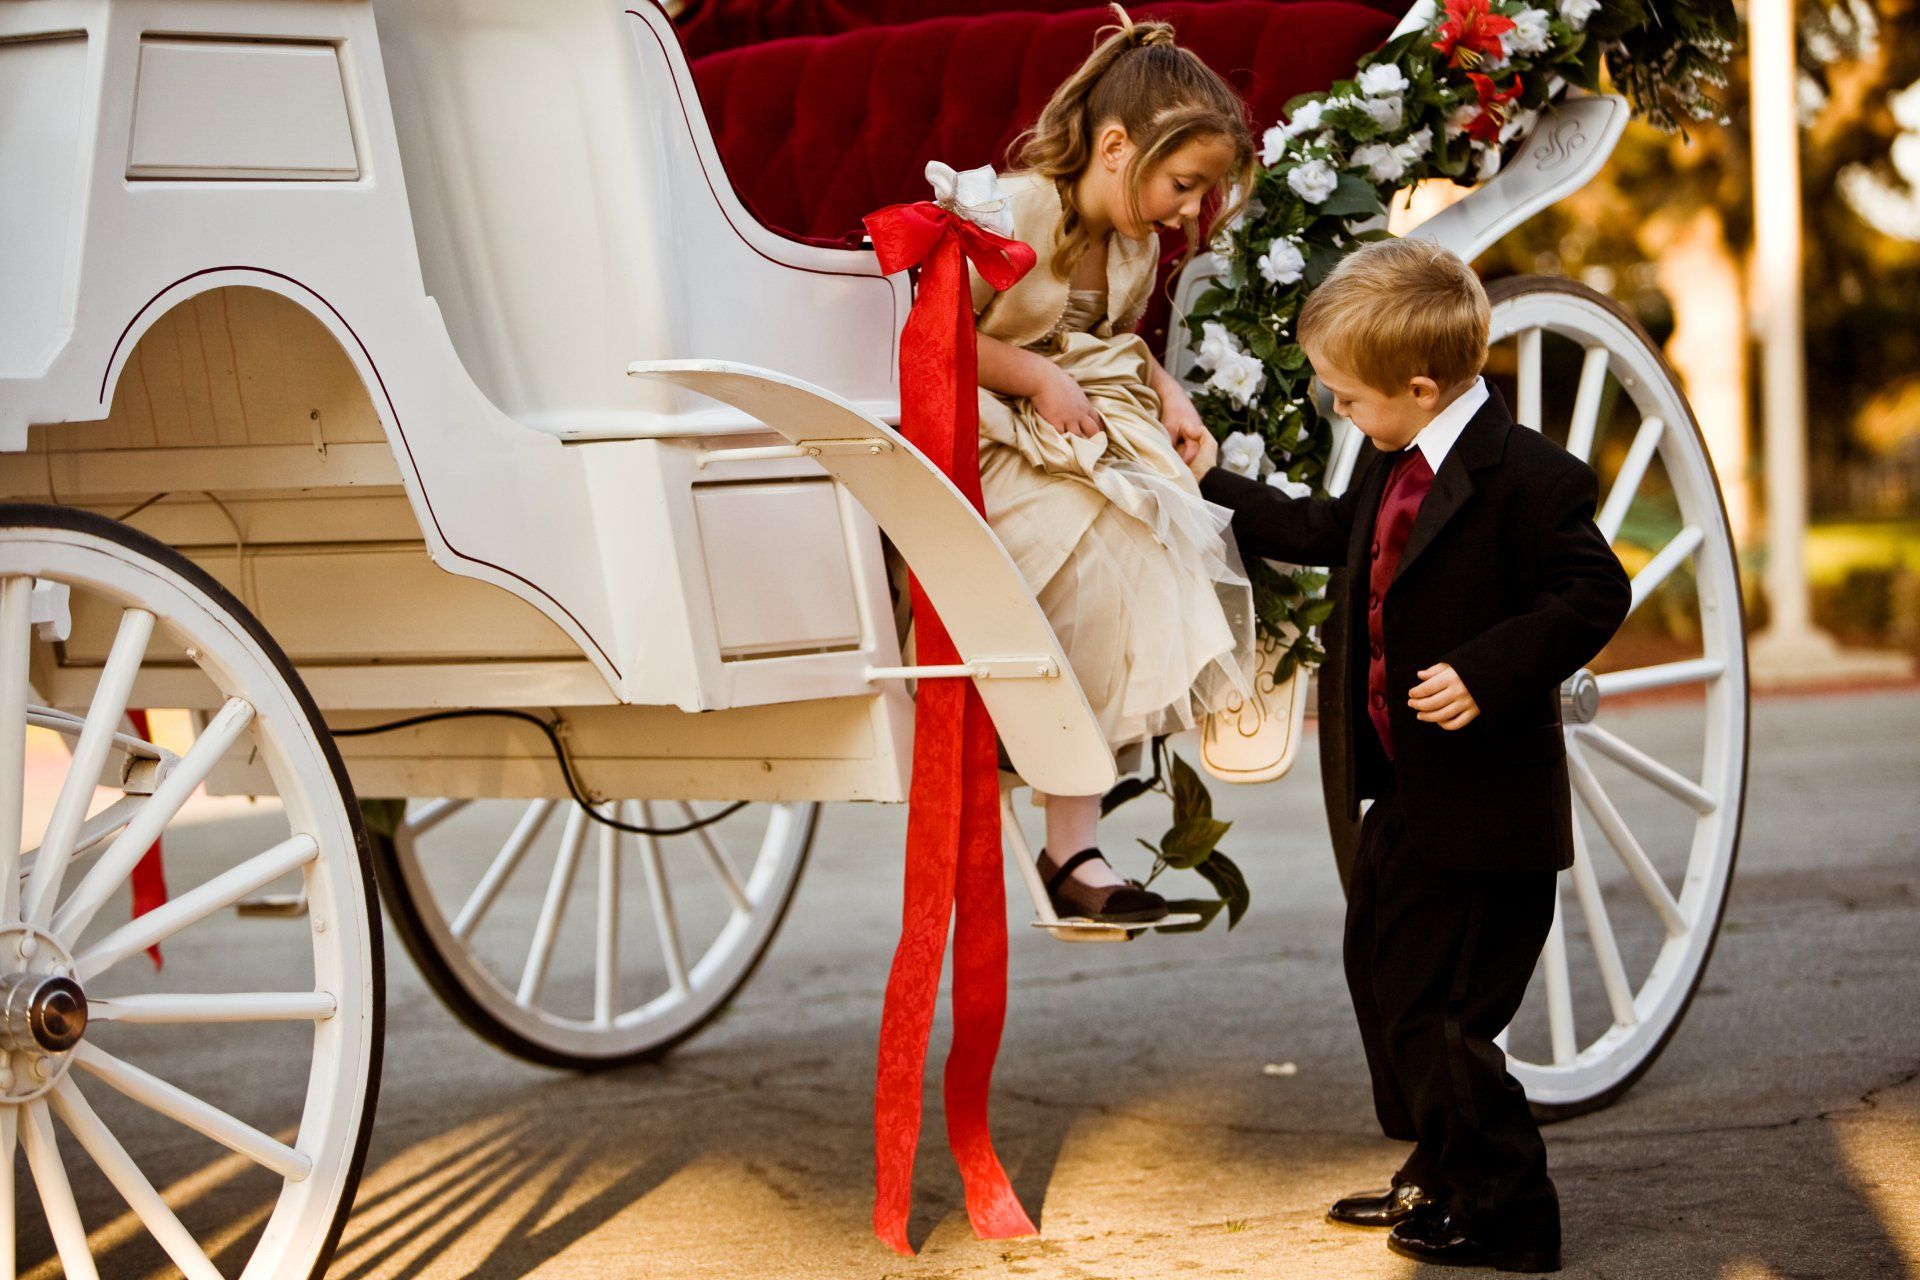 groomsmen helping flower girl out of a horse carriage, kids with horse carriage at a wedding